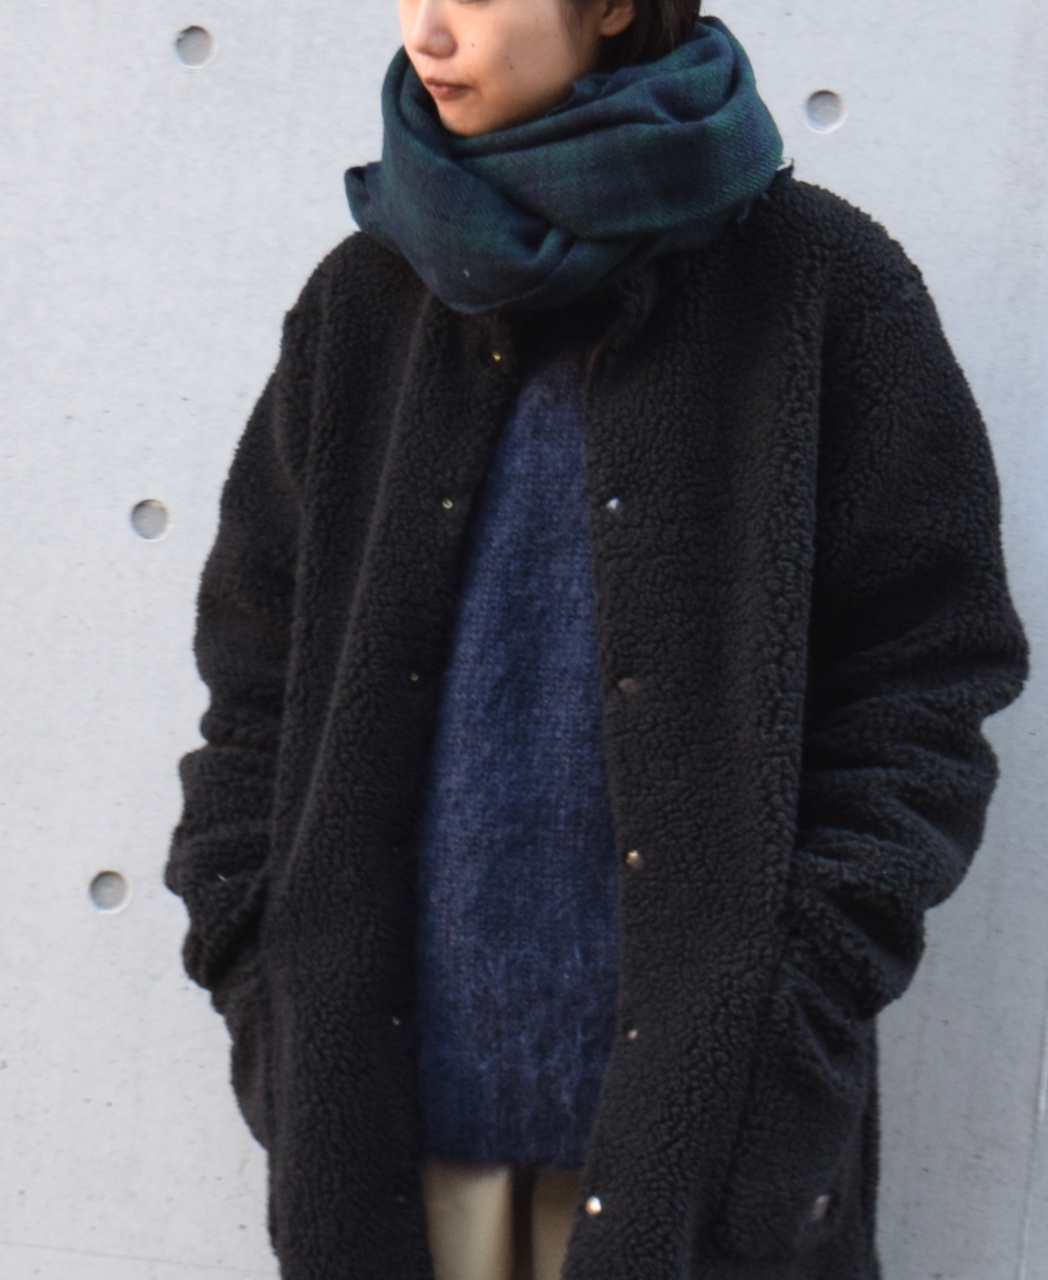 NSL21501 (ストール) BOILED WOOL 2TONE CHECK STOLE